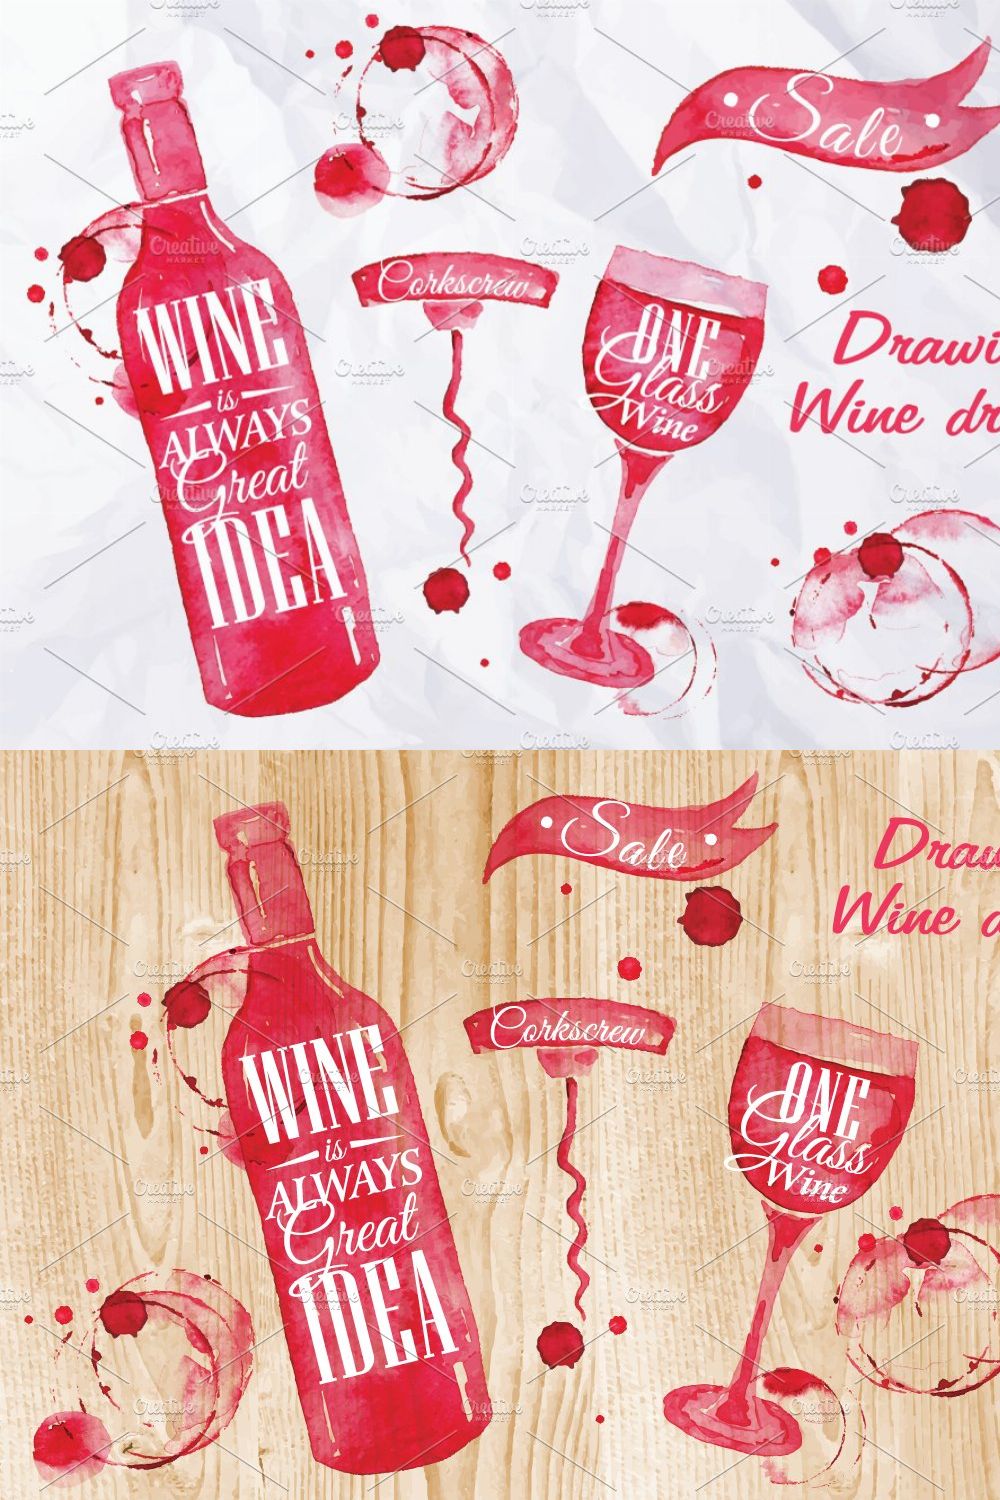 Drawing wine drops pinterest preview image.